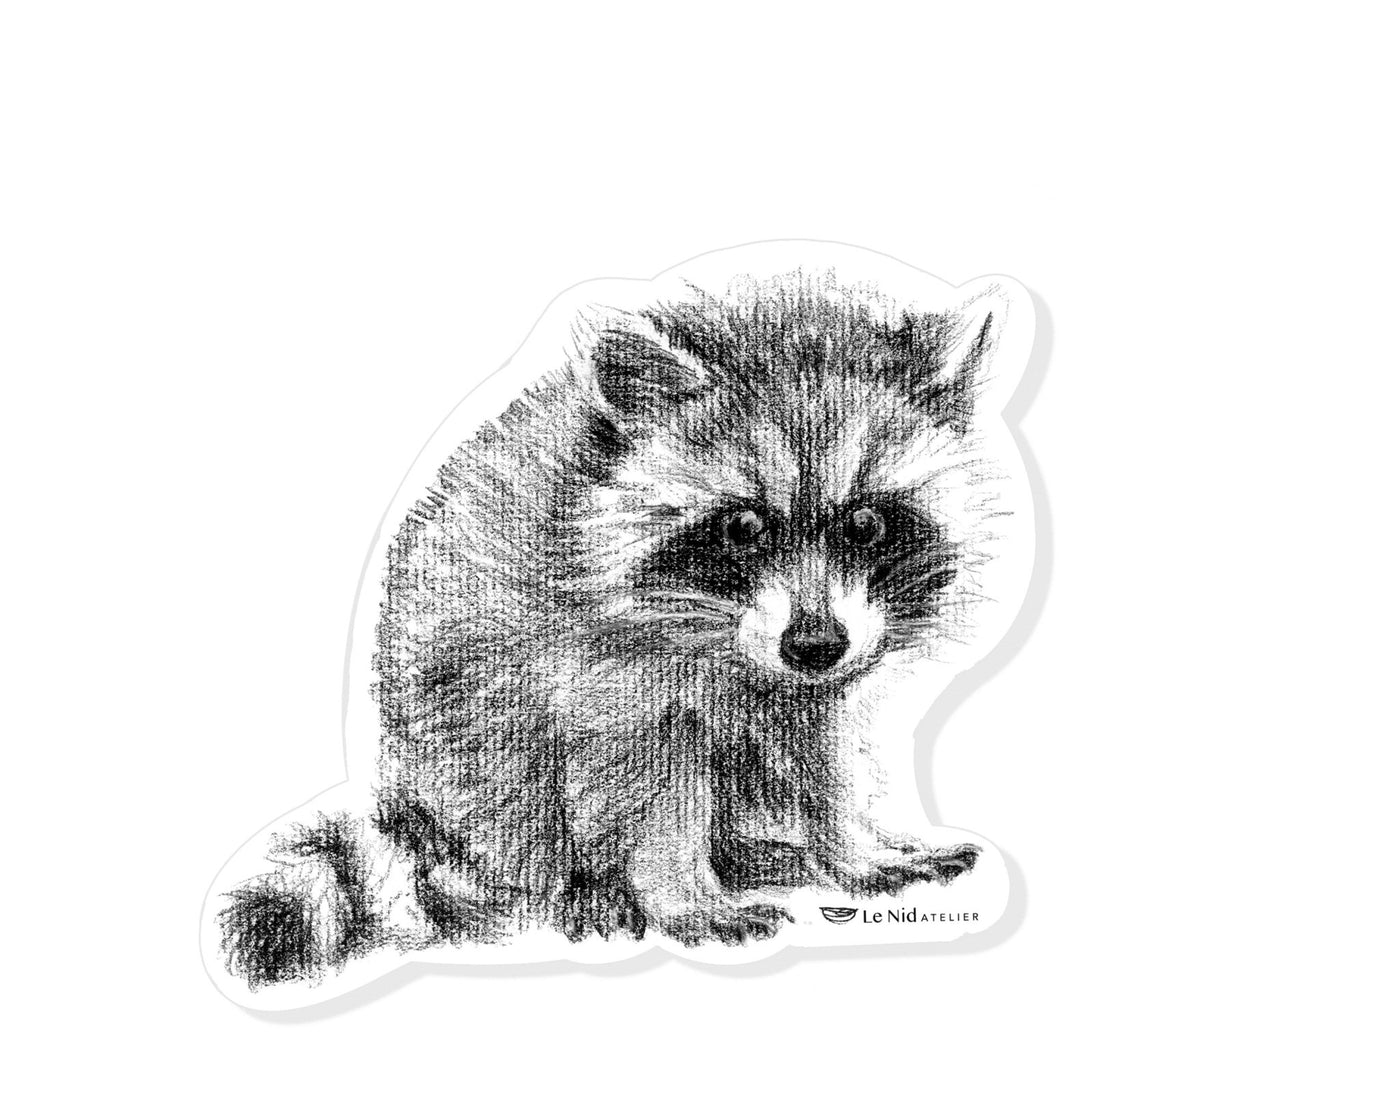 Adorable Raccoon Sticker for Water Bottle, Agenda or Computer - LE NID atelier